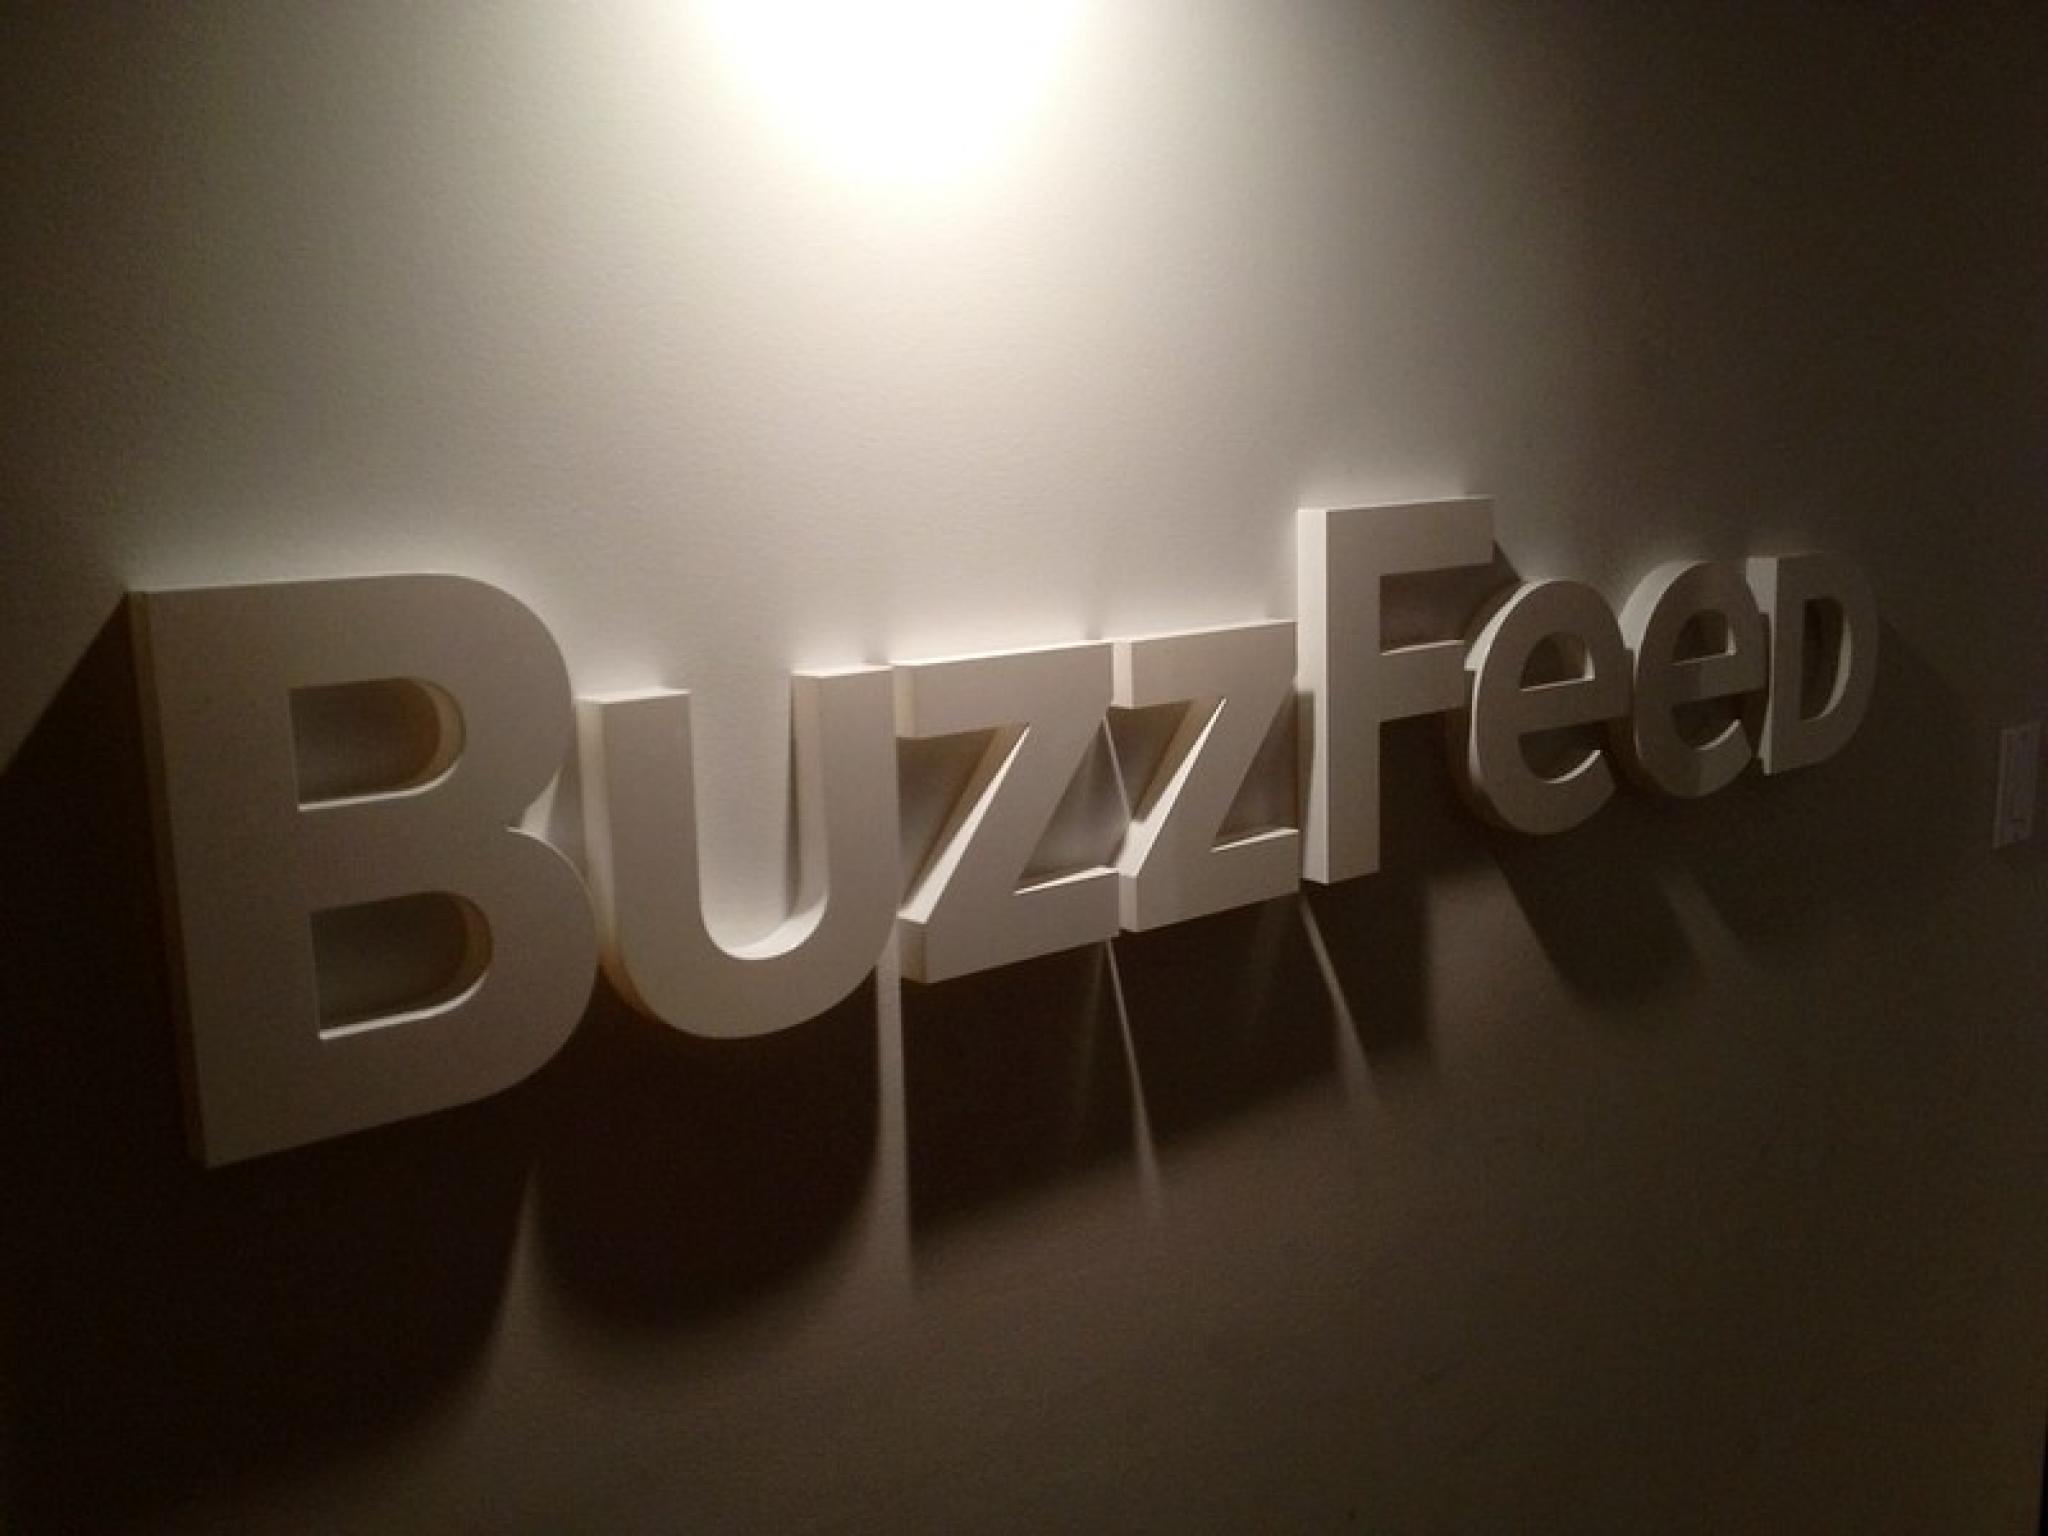  why-buzzfeed-shares-are-surging-thursday 